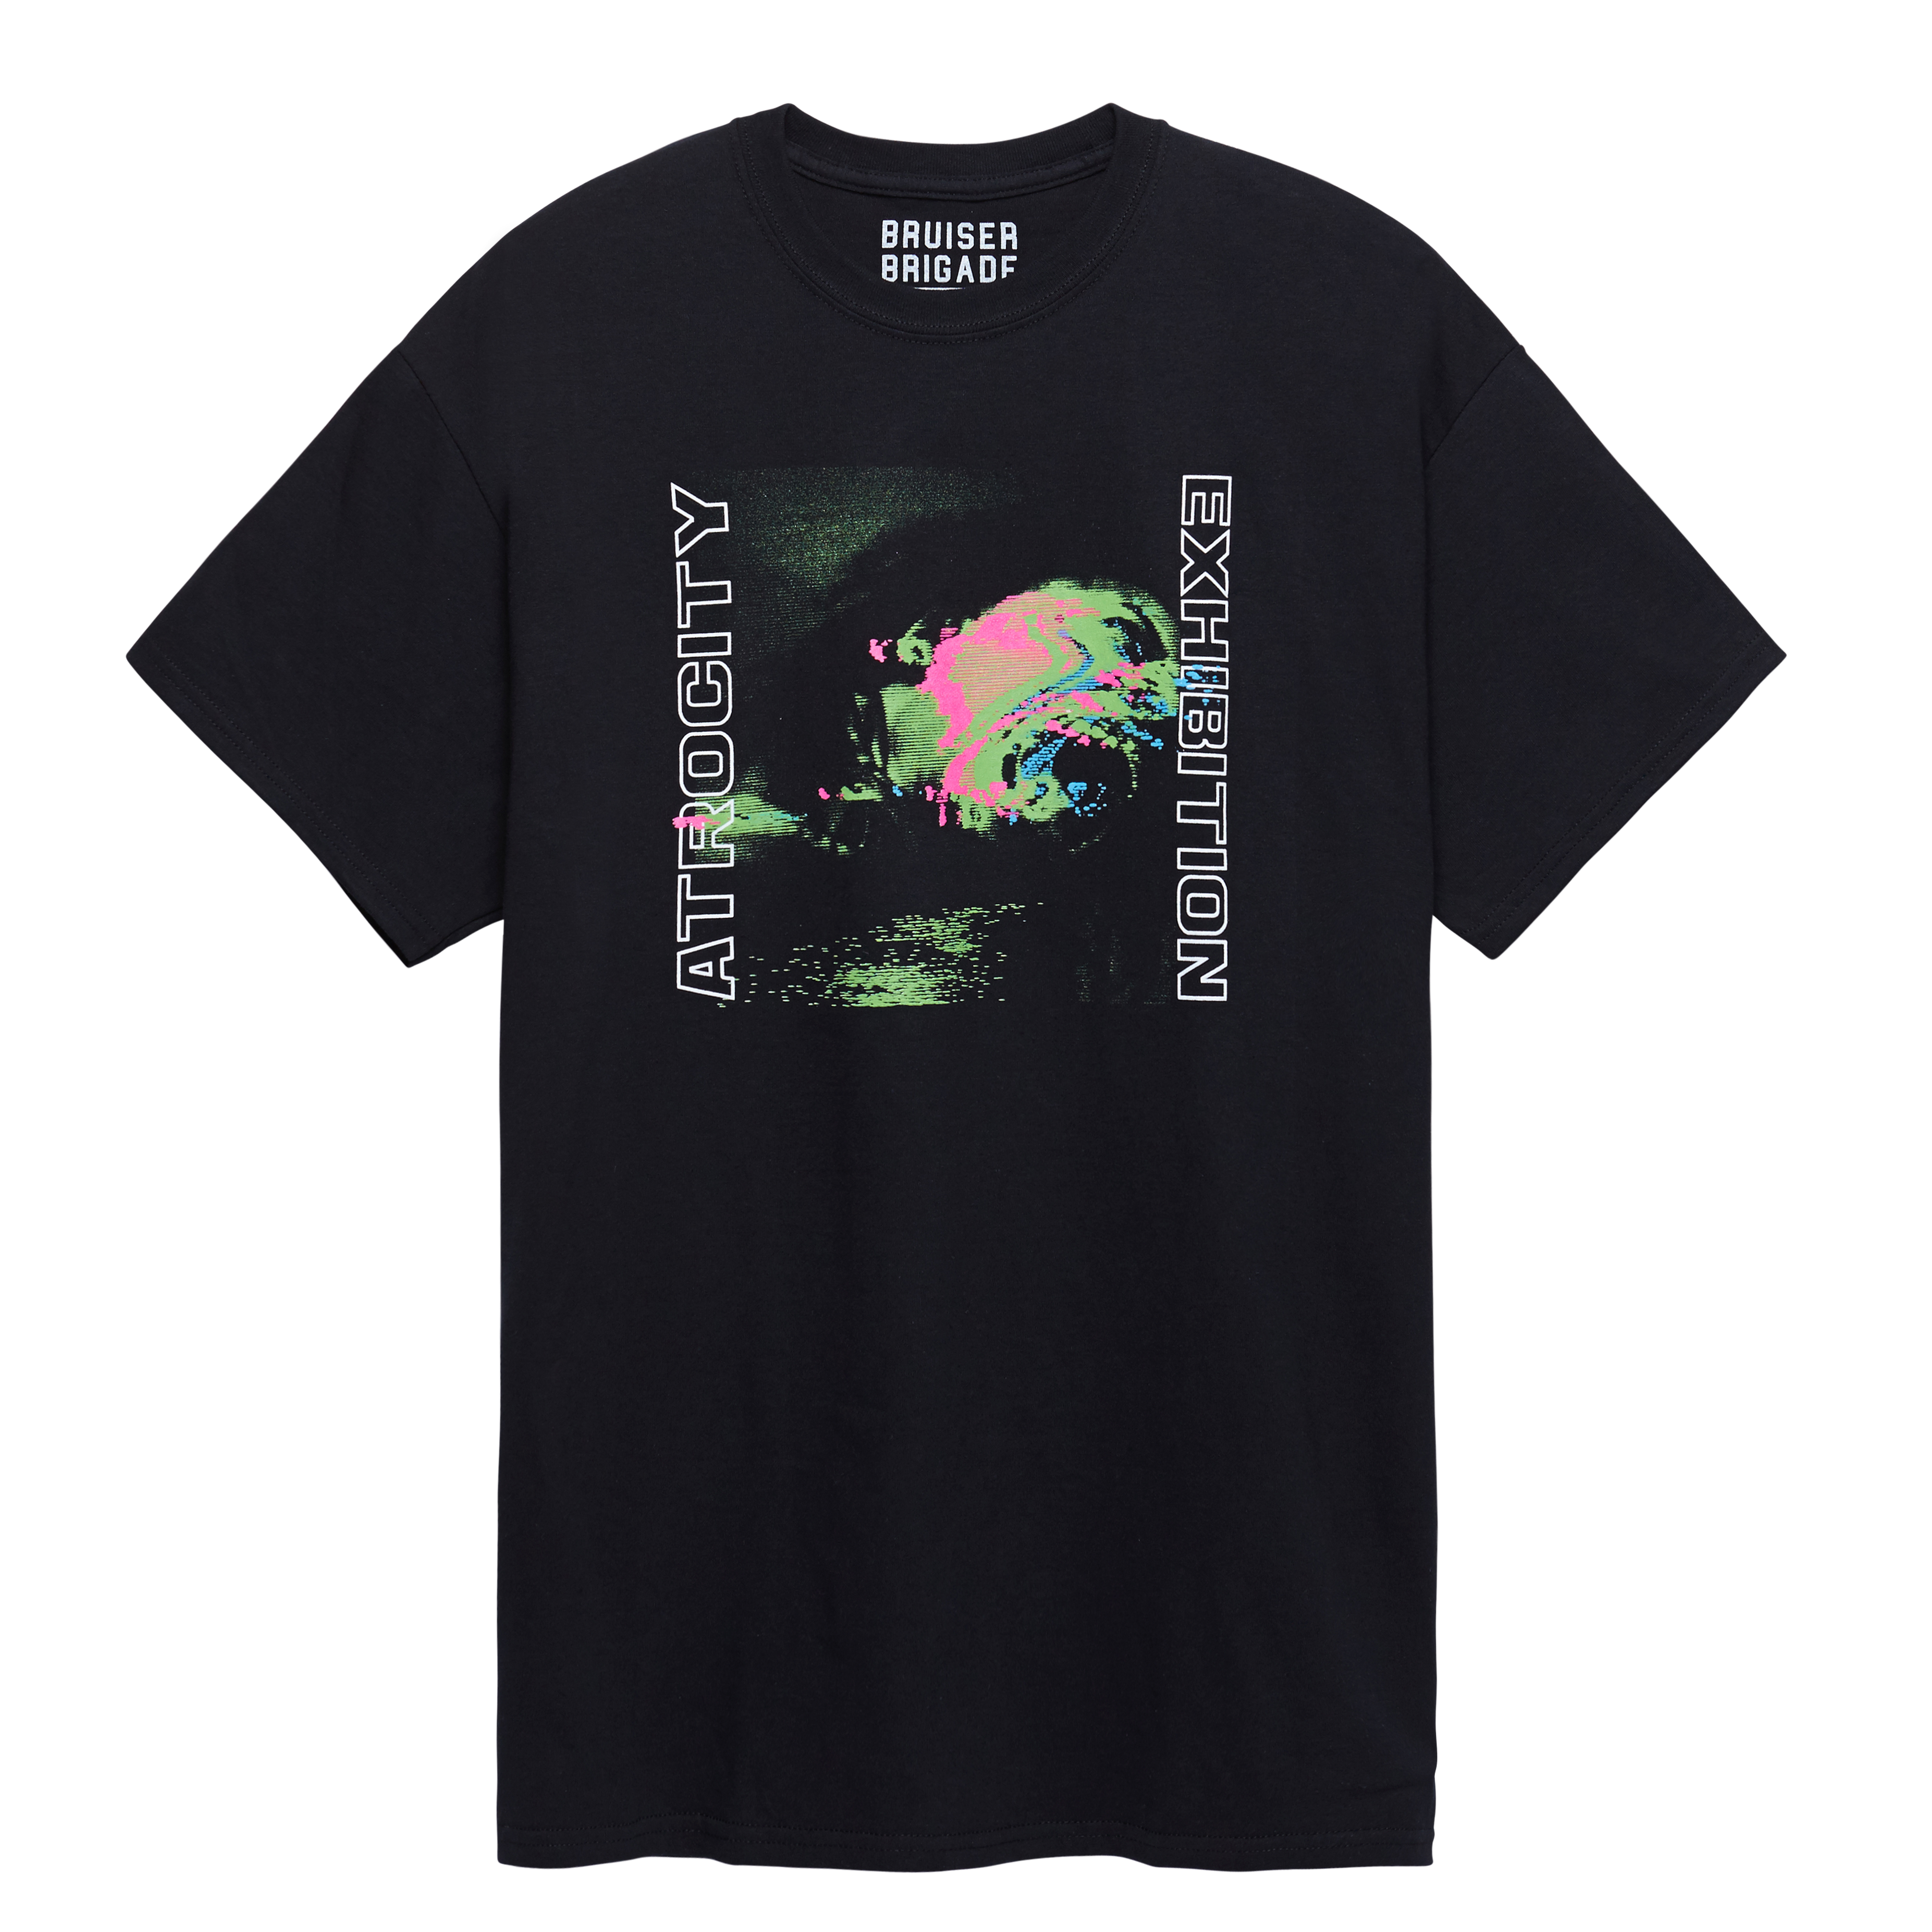 This is Danny Brown&#x27;s &#x27;Atrocity Exhibition&#x27; merch with PacSun.